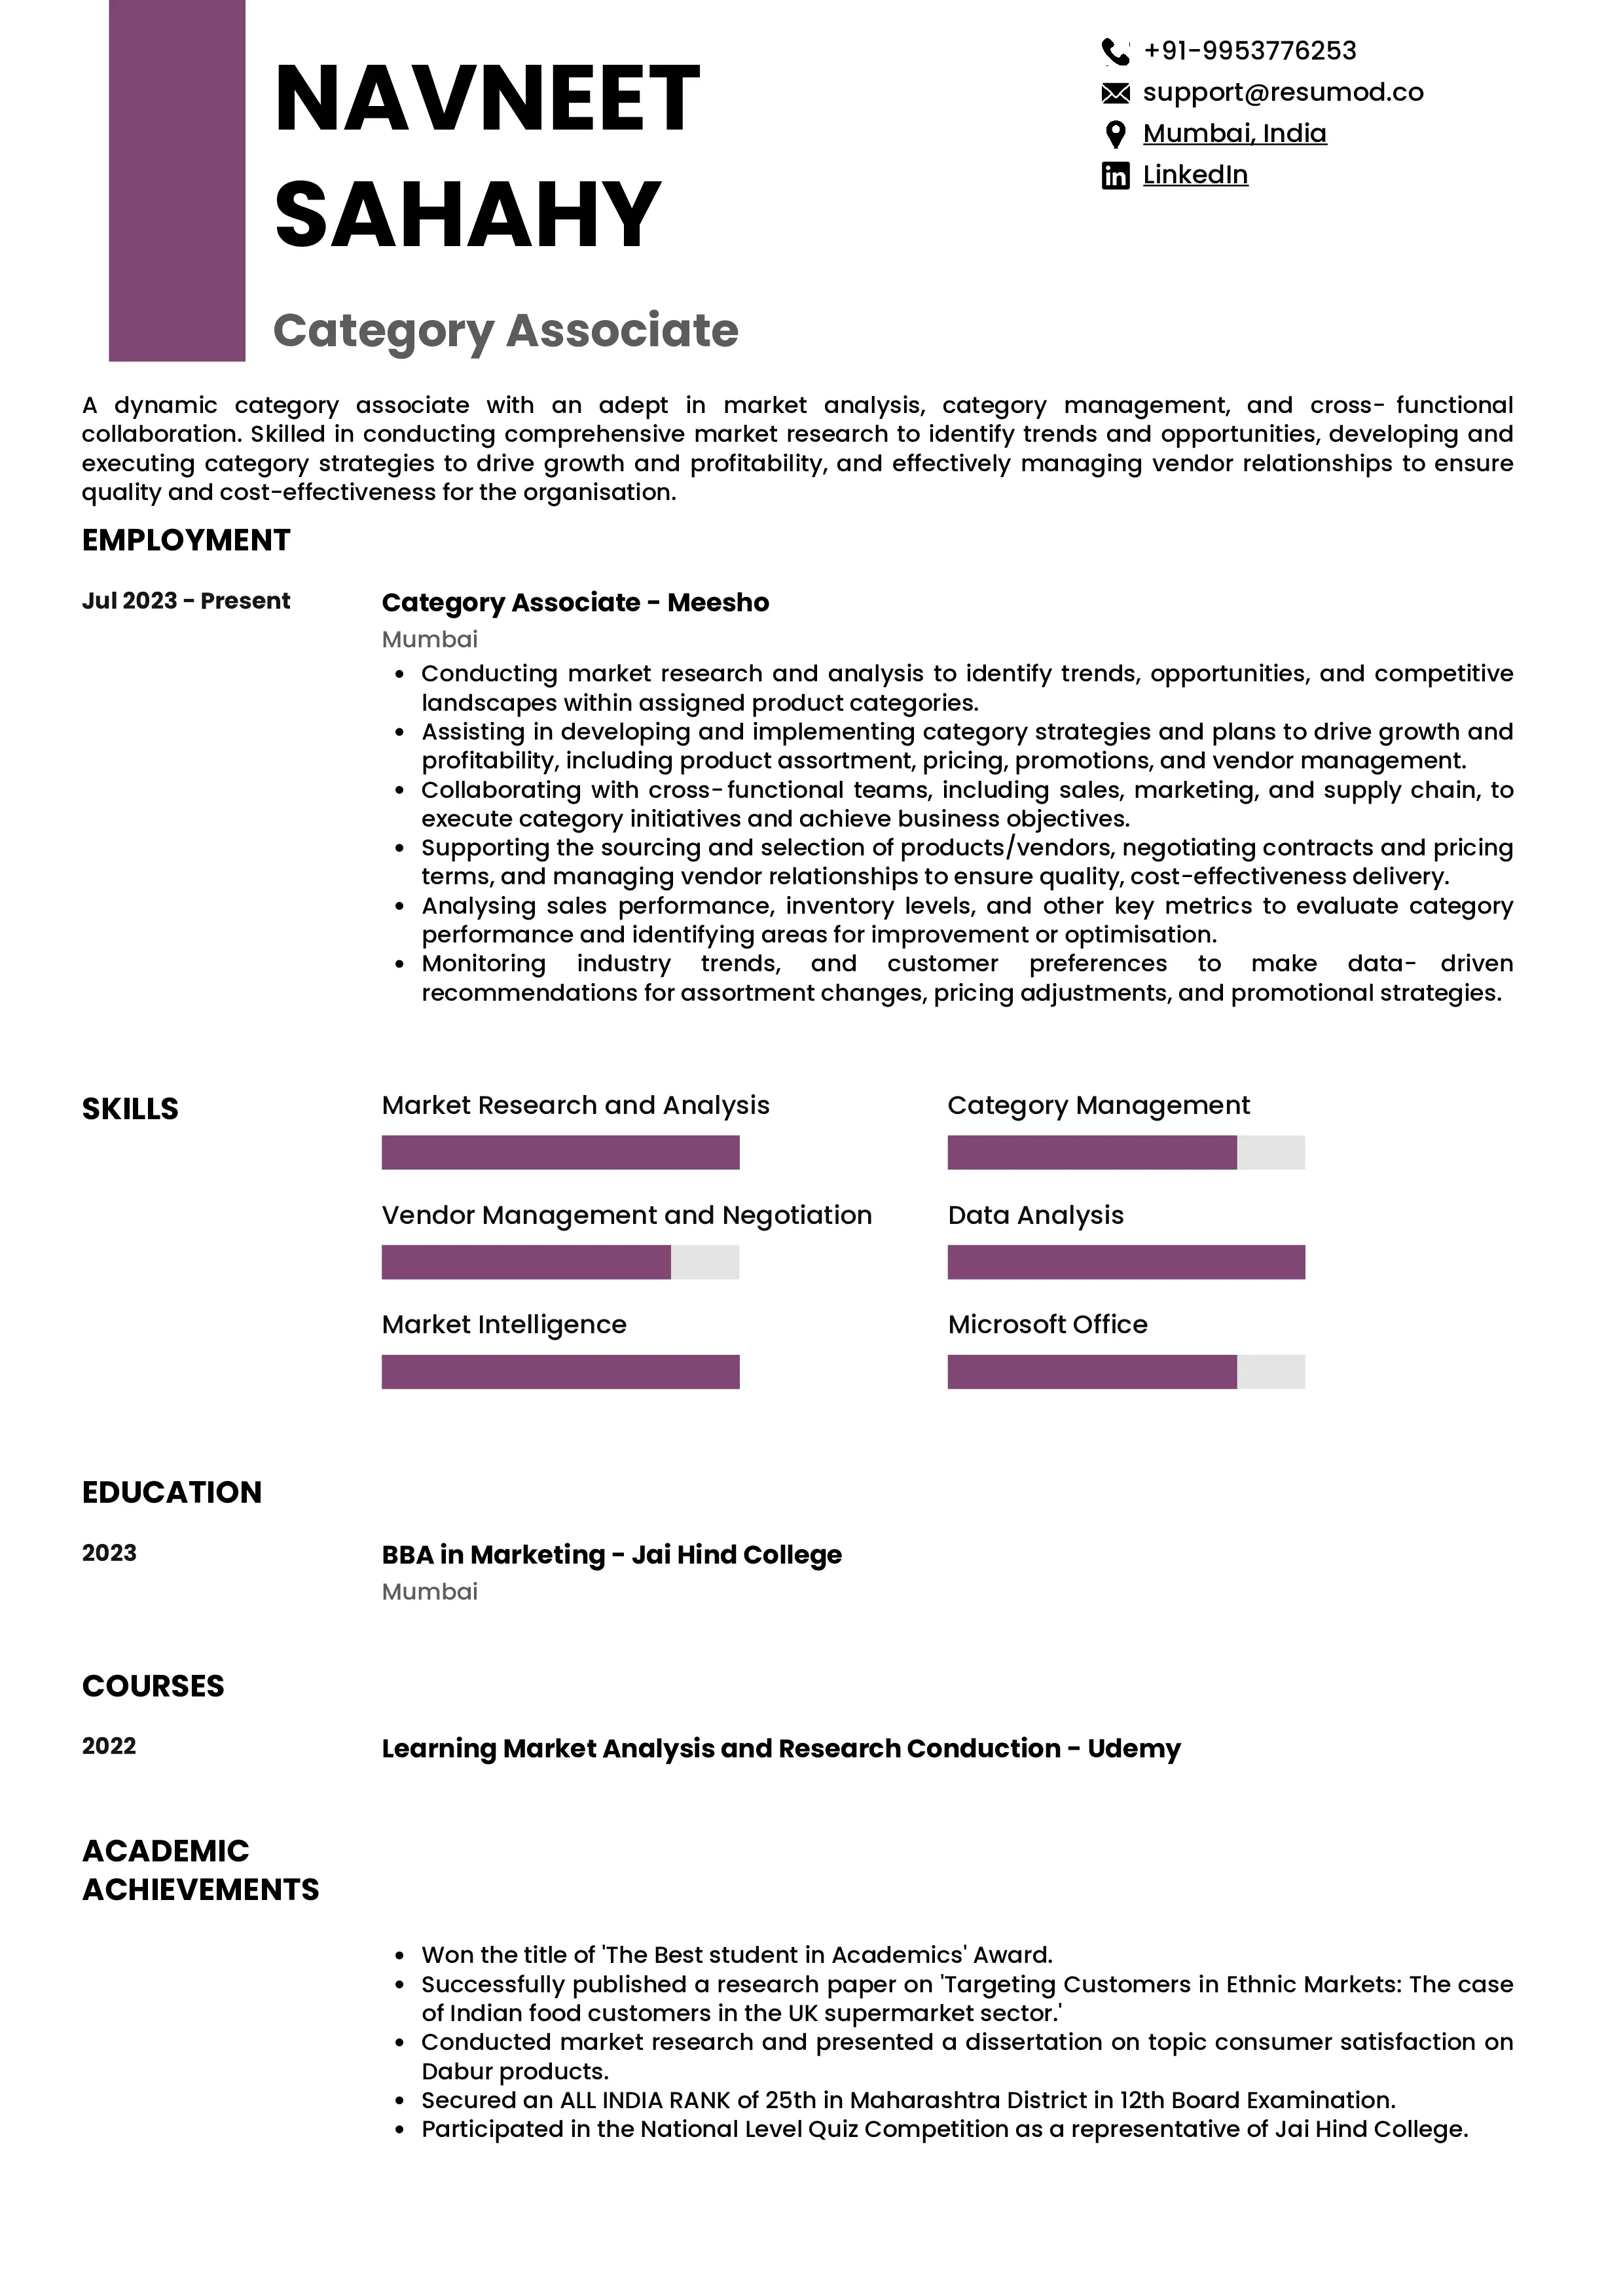 Sample Resume of Category Associate | Free Resume Templates & Samples on Resumod.co